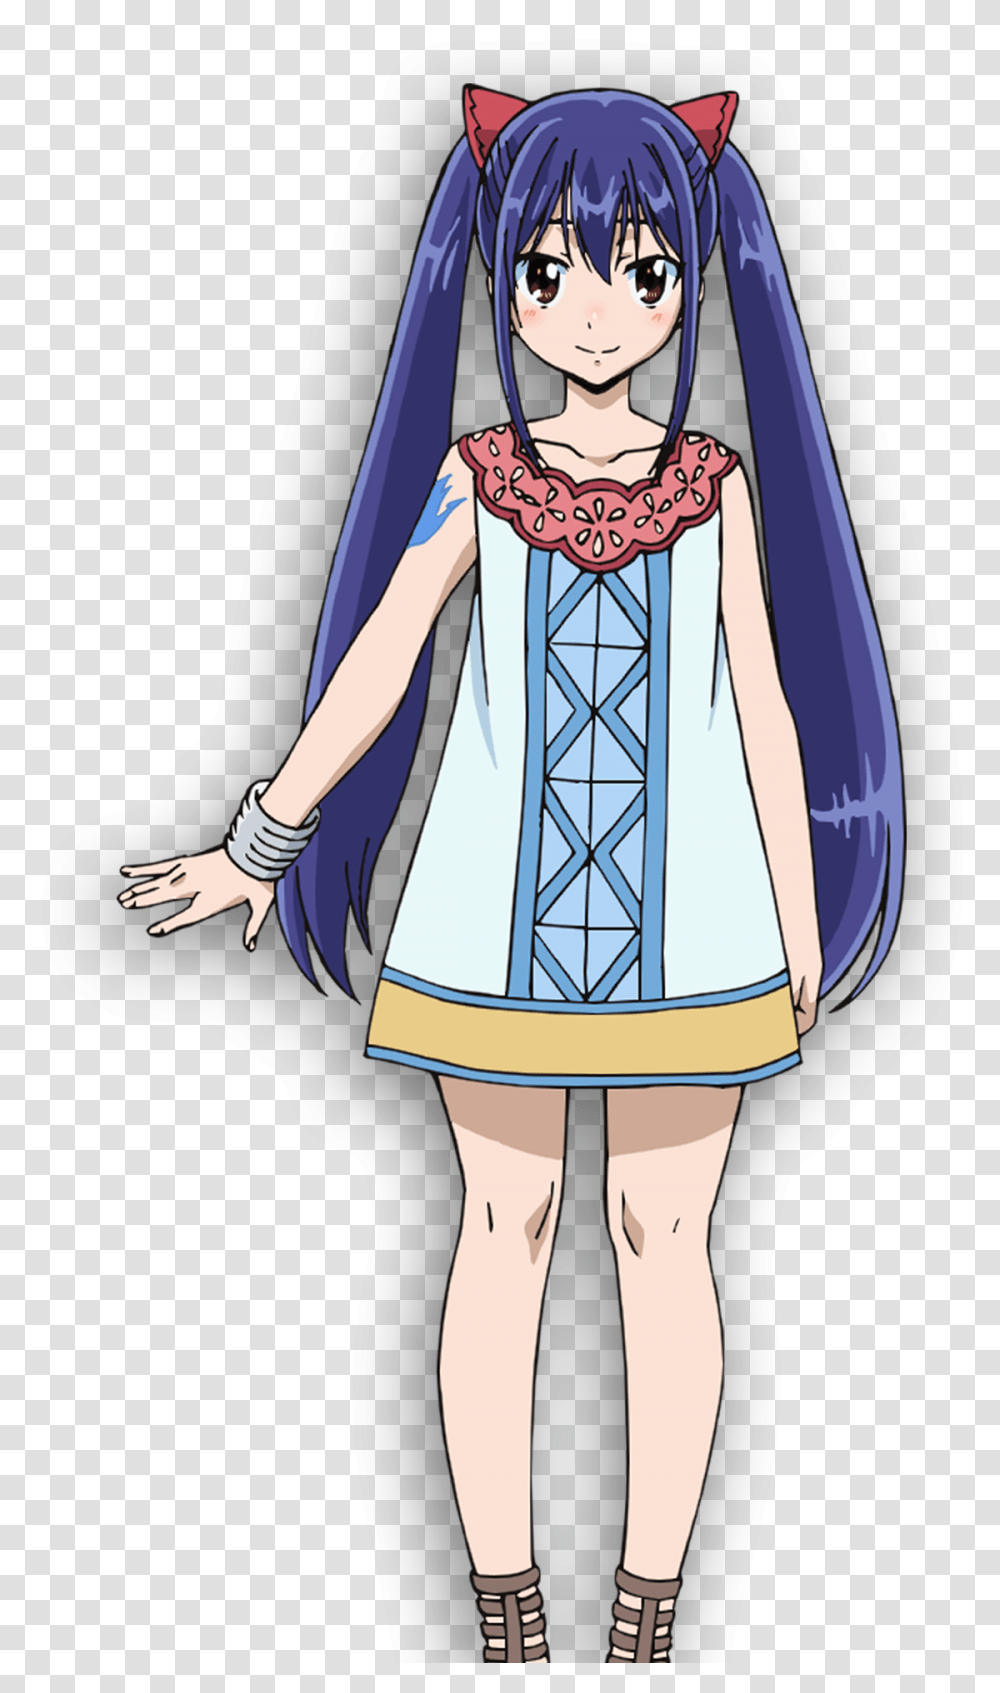 Wendy Fairy Tail 8 Image Fairy Tail Dragon Cry Wendy Marvelle, Clothing, Costume, Person, Manga Transparent Png